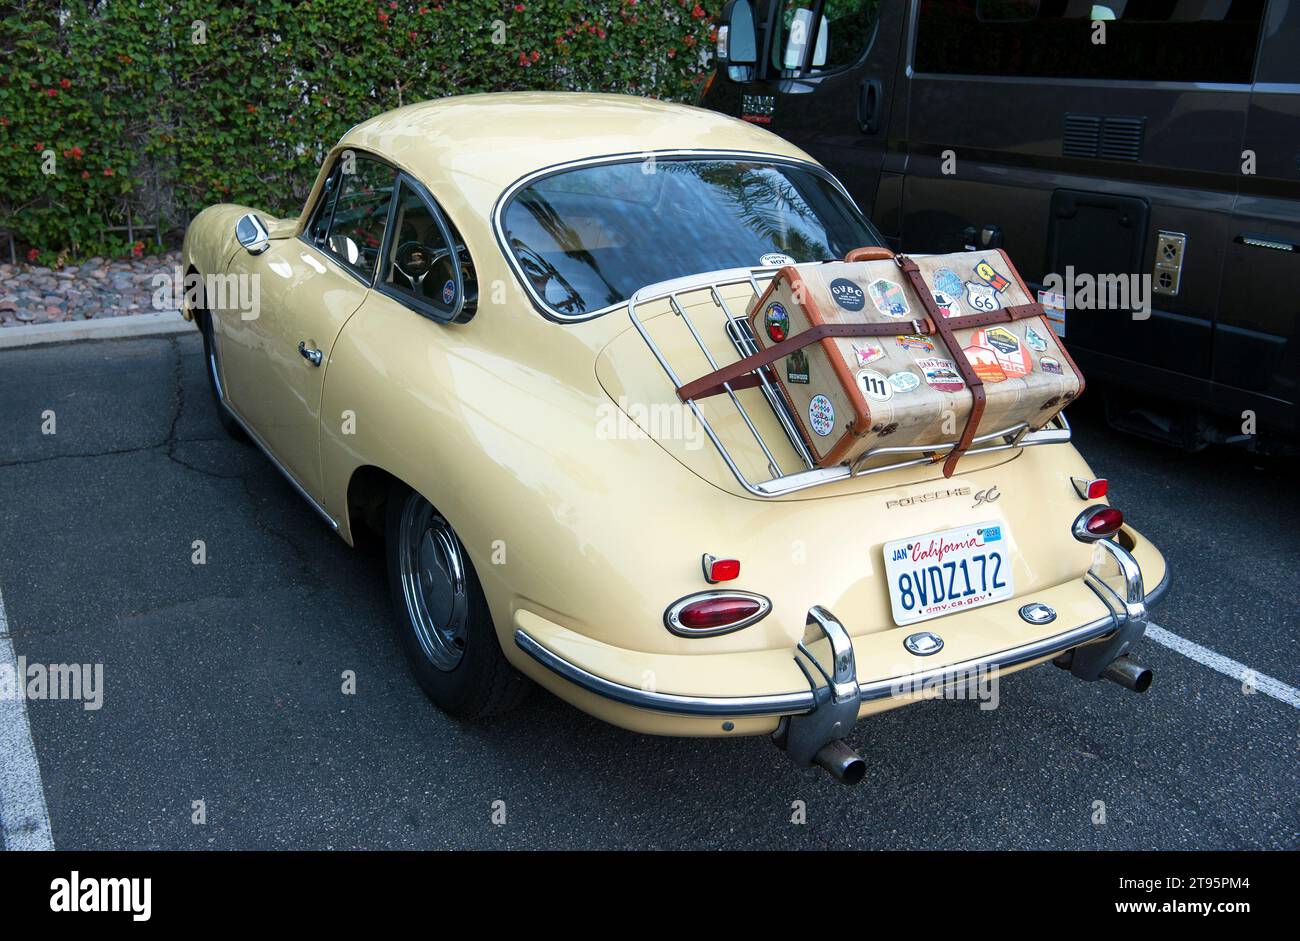 Vintage Porsche sportscar parked at hotel in Palm Springs, California, USA Stock Photo